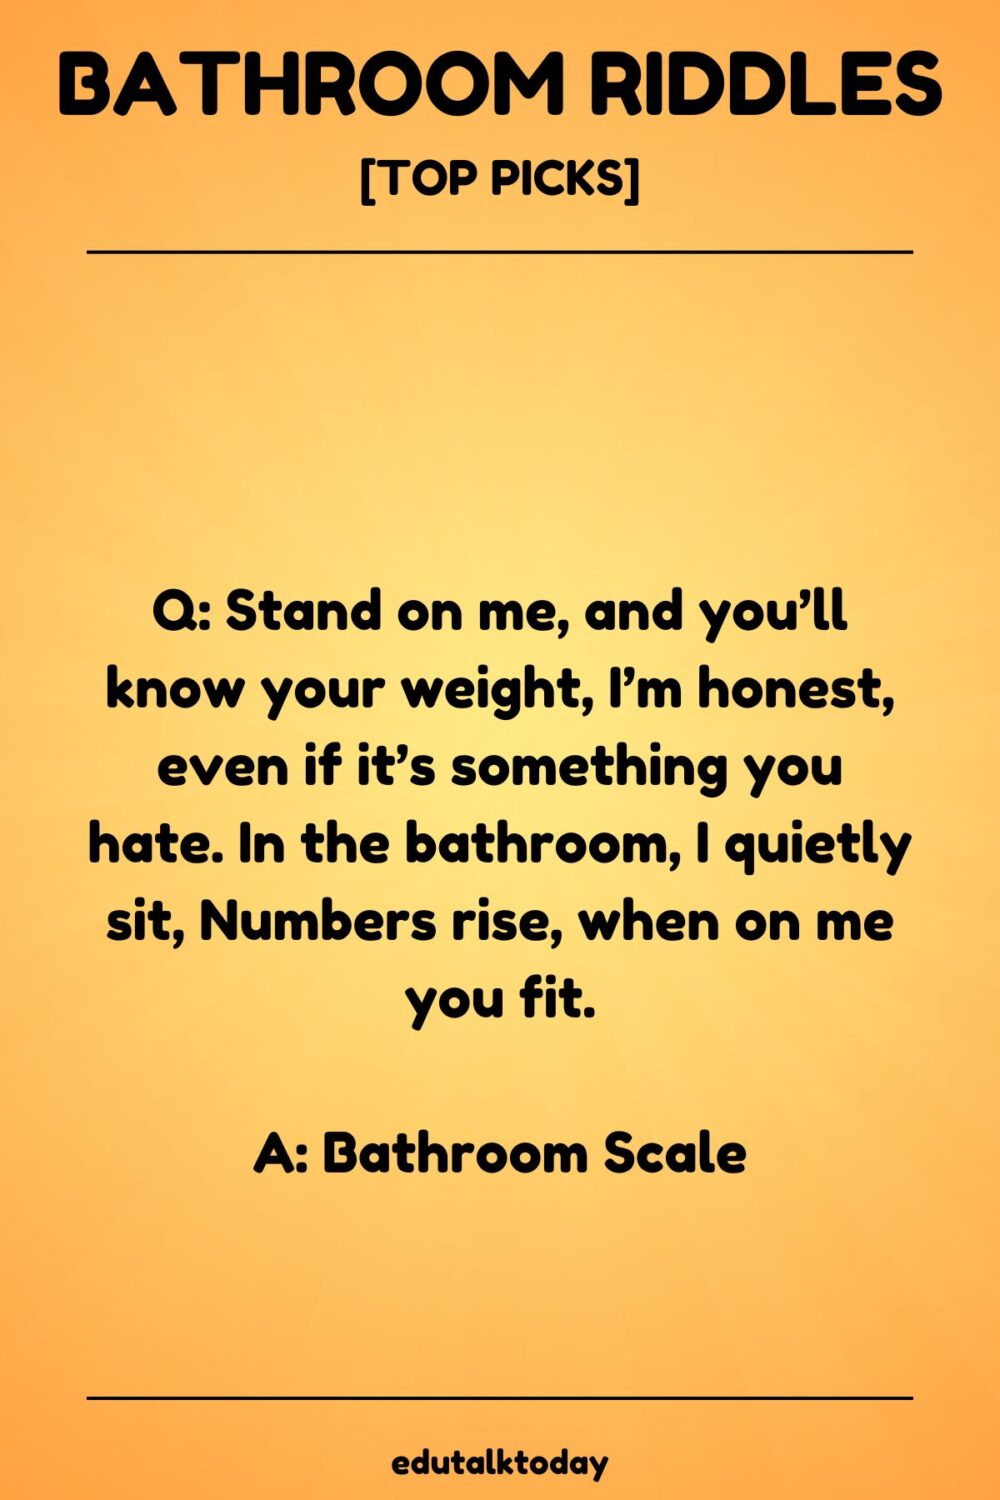 52 Bathroom Riddles with Answers